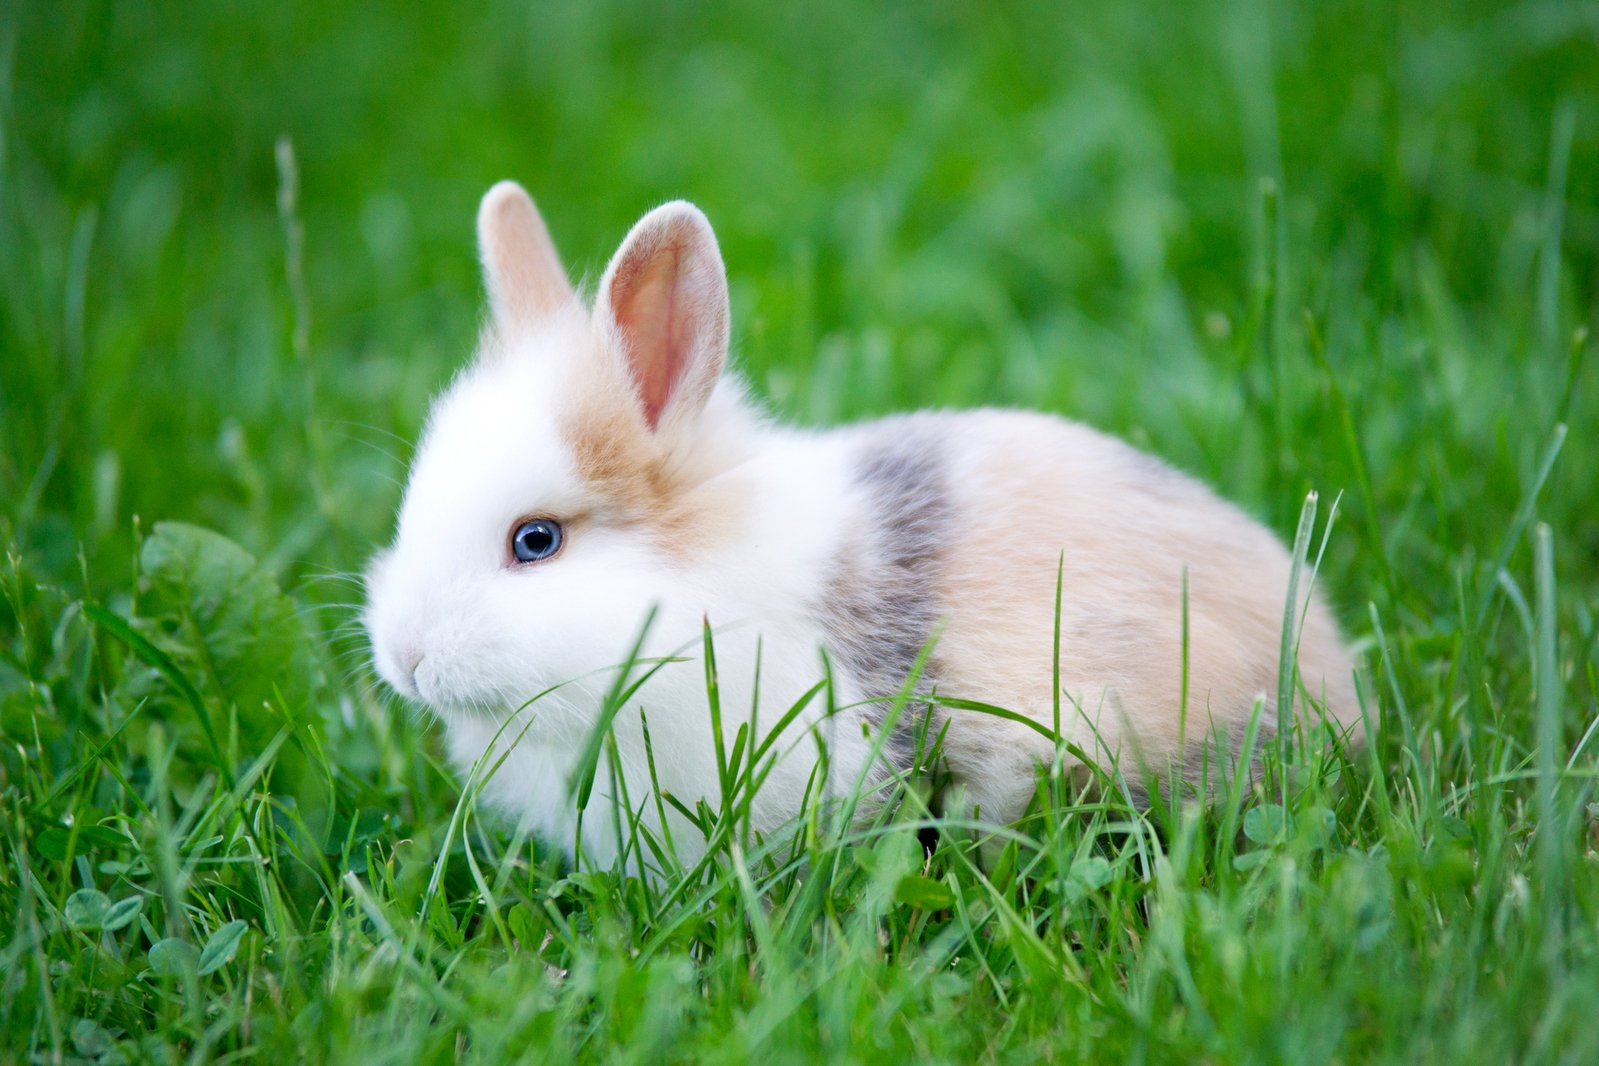 a rabbit is sitting in the grass and looking at the camera